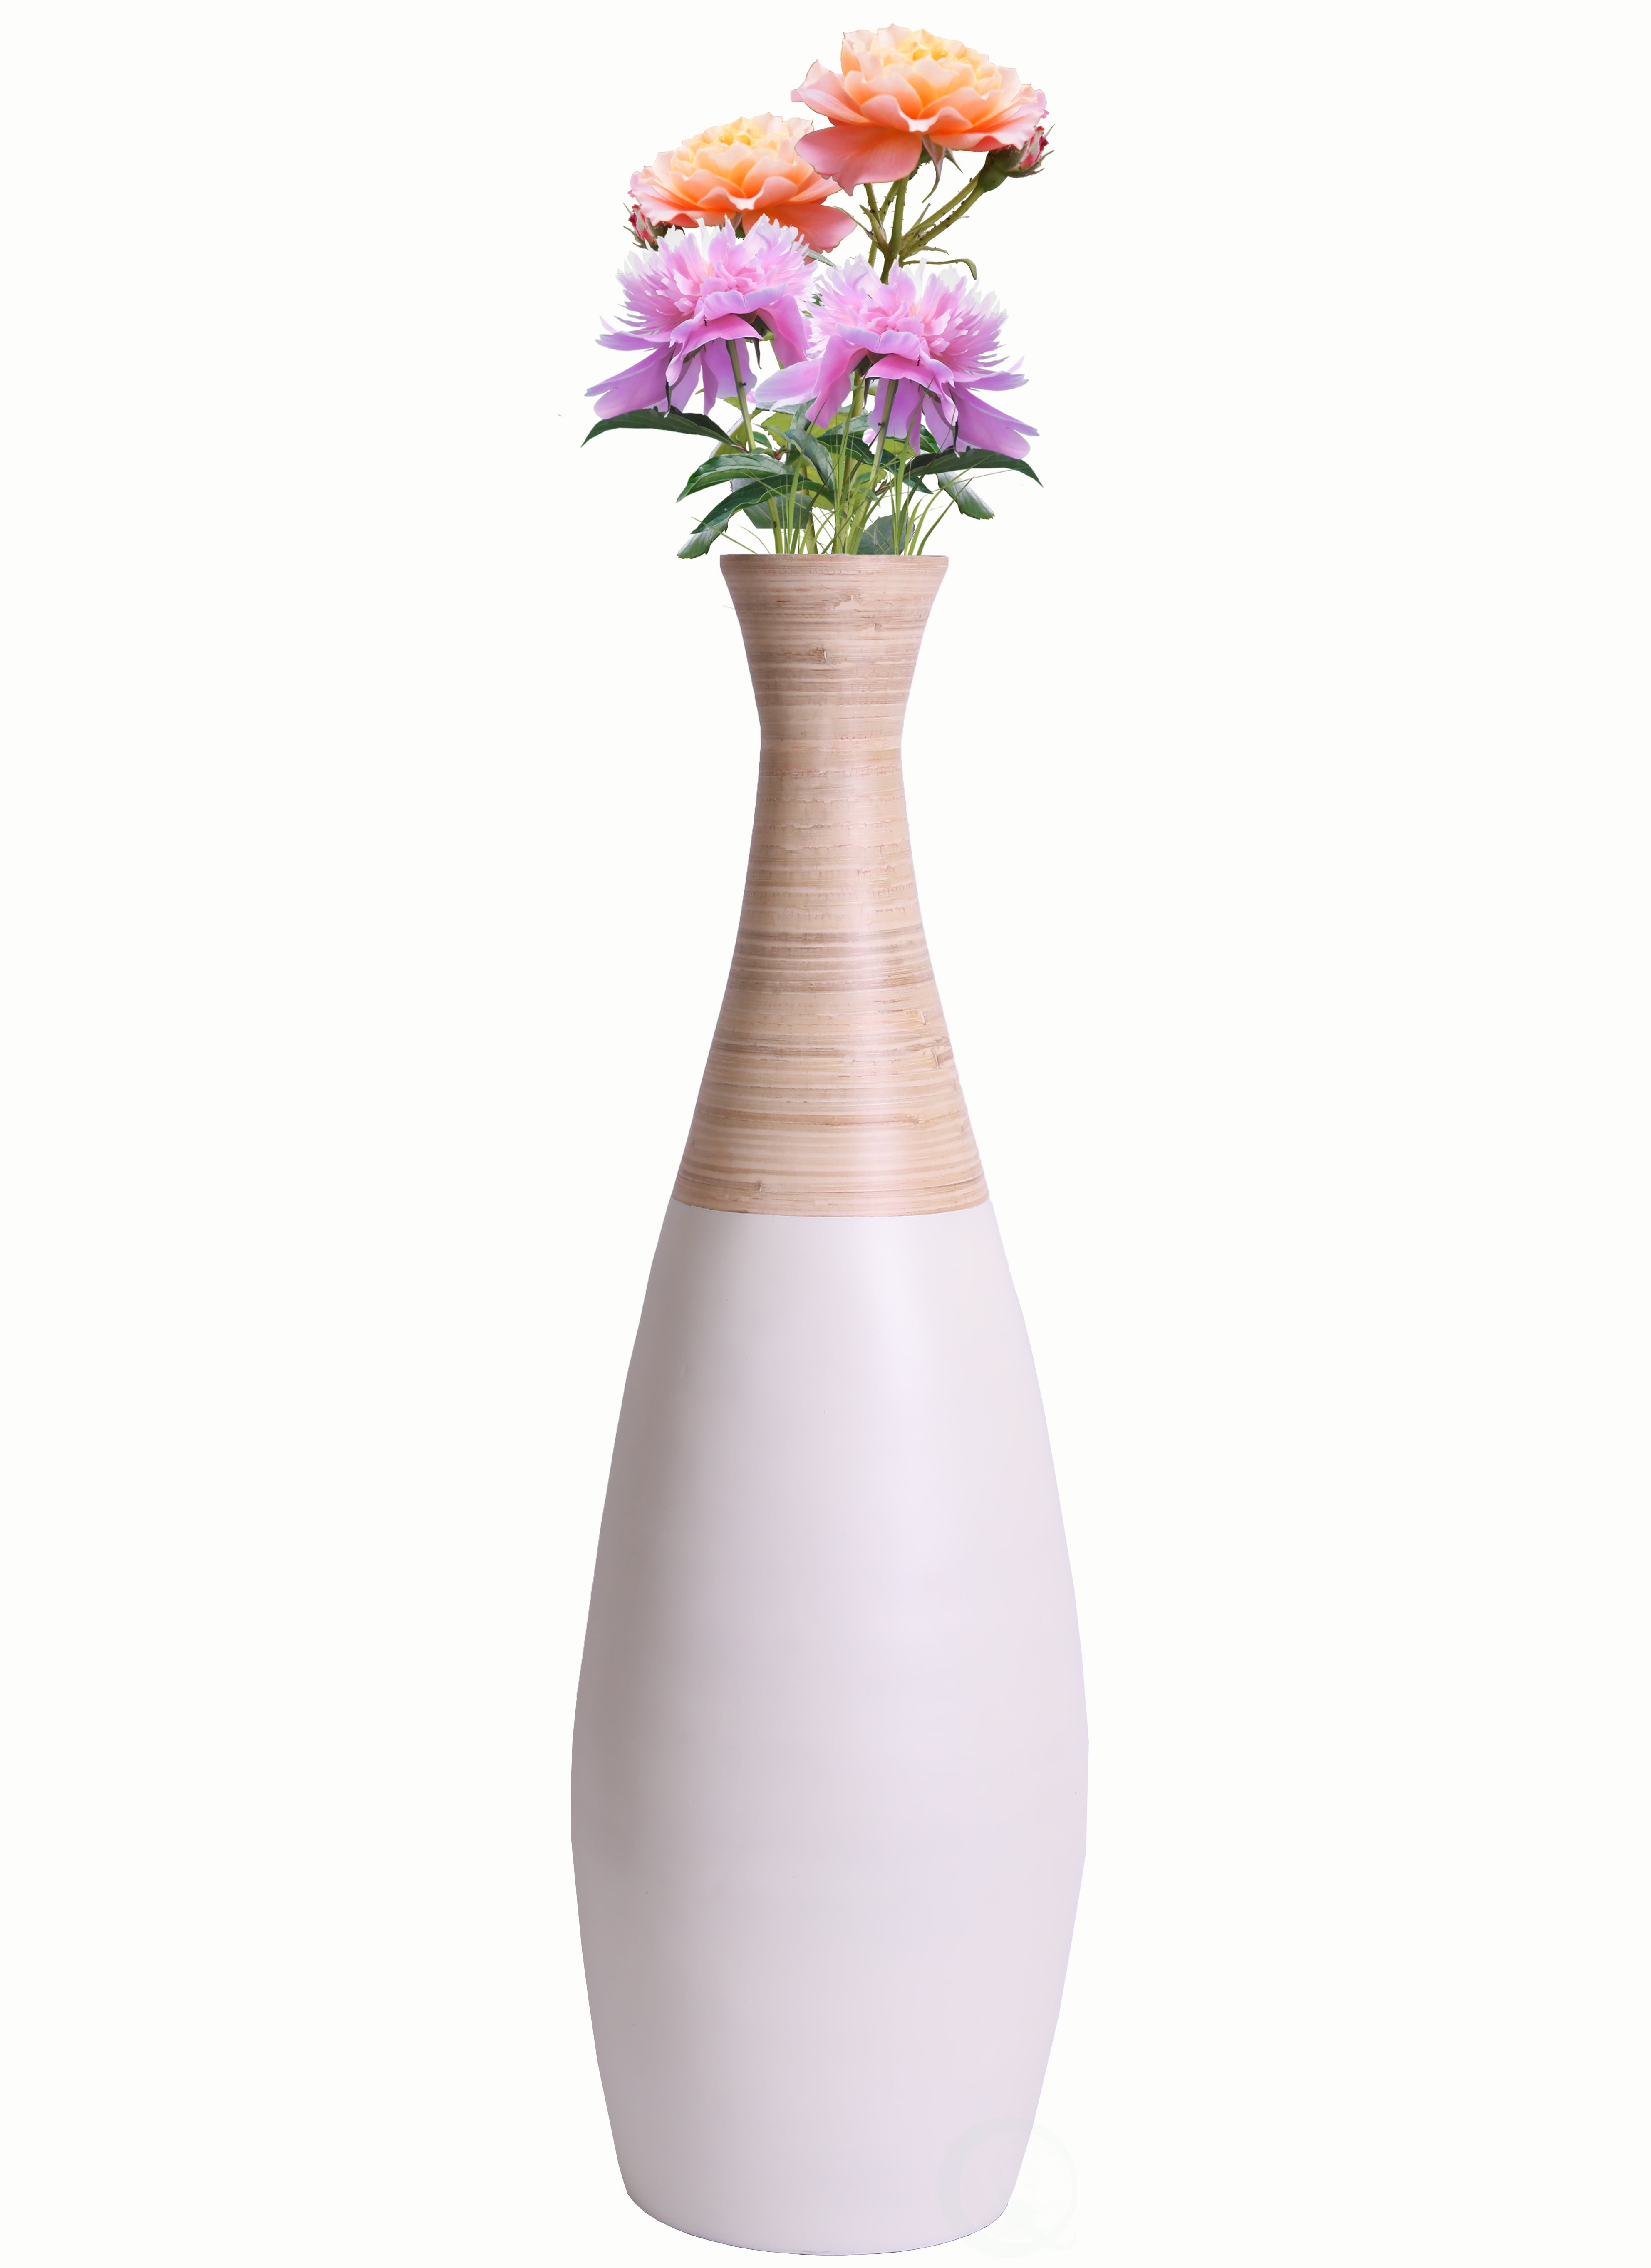 31 5 Spun Bamboo Tall Trumpet Floor Vase White And Natural